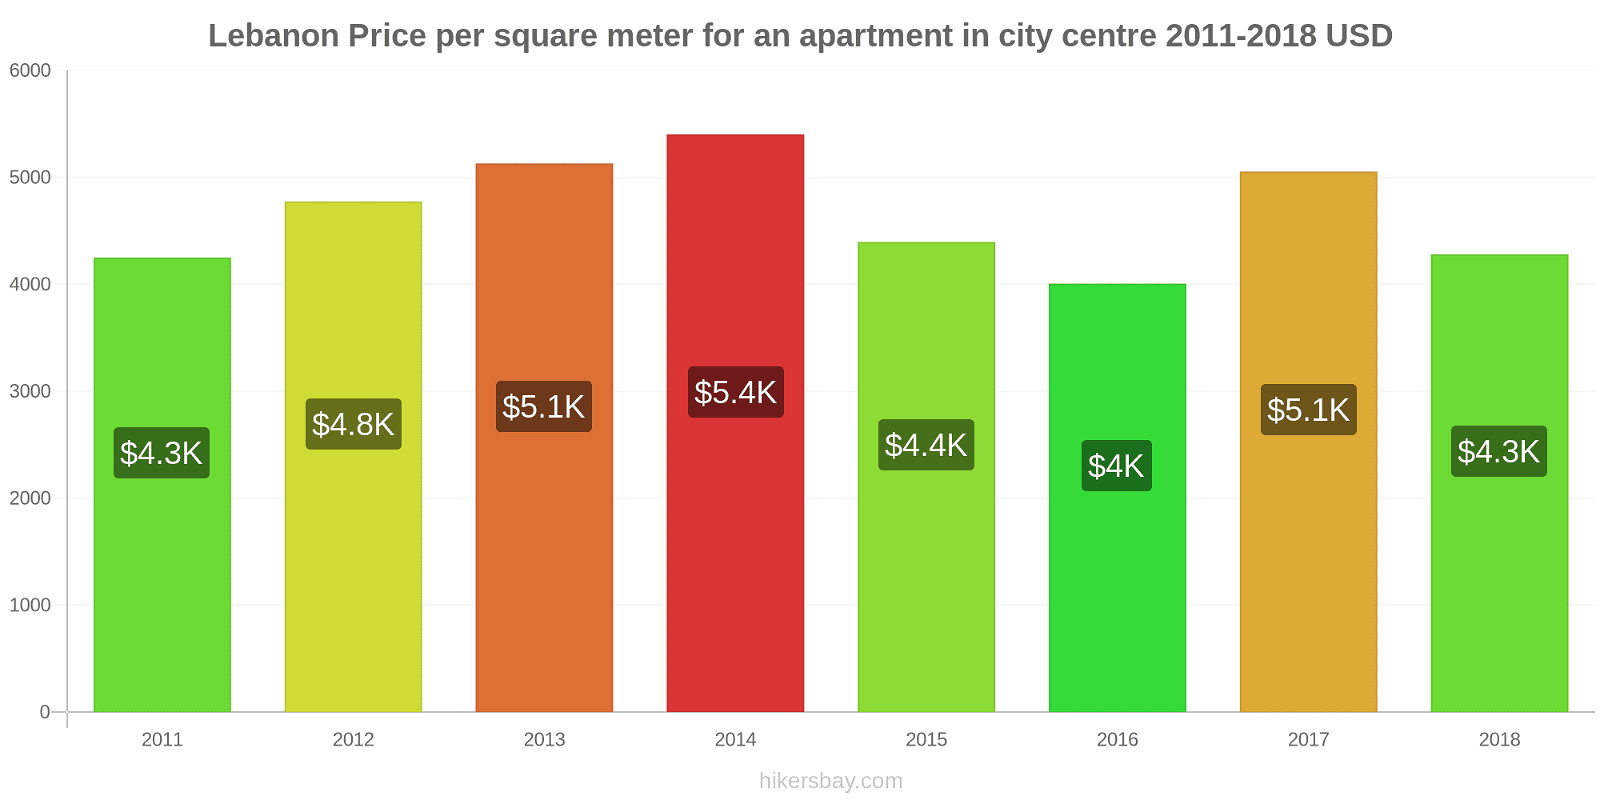 Lebanon price changes Price per square meter for an apartment in the city center hikersbay.com